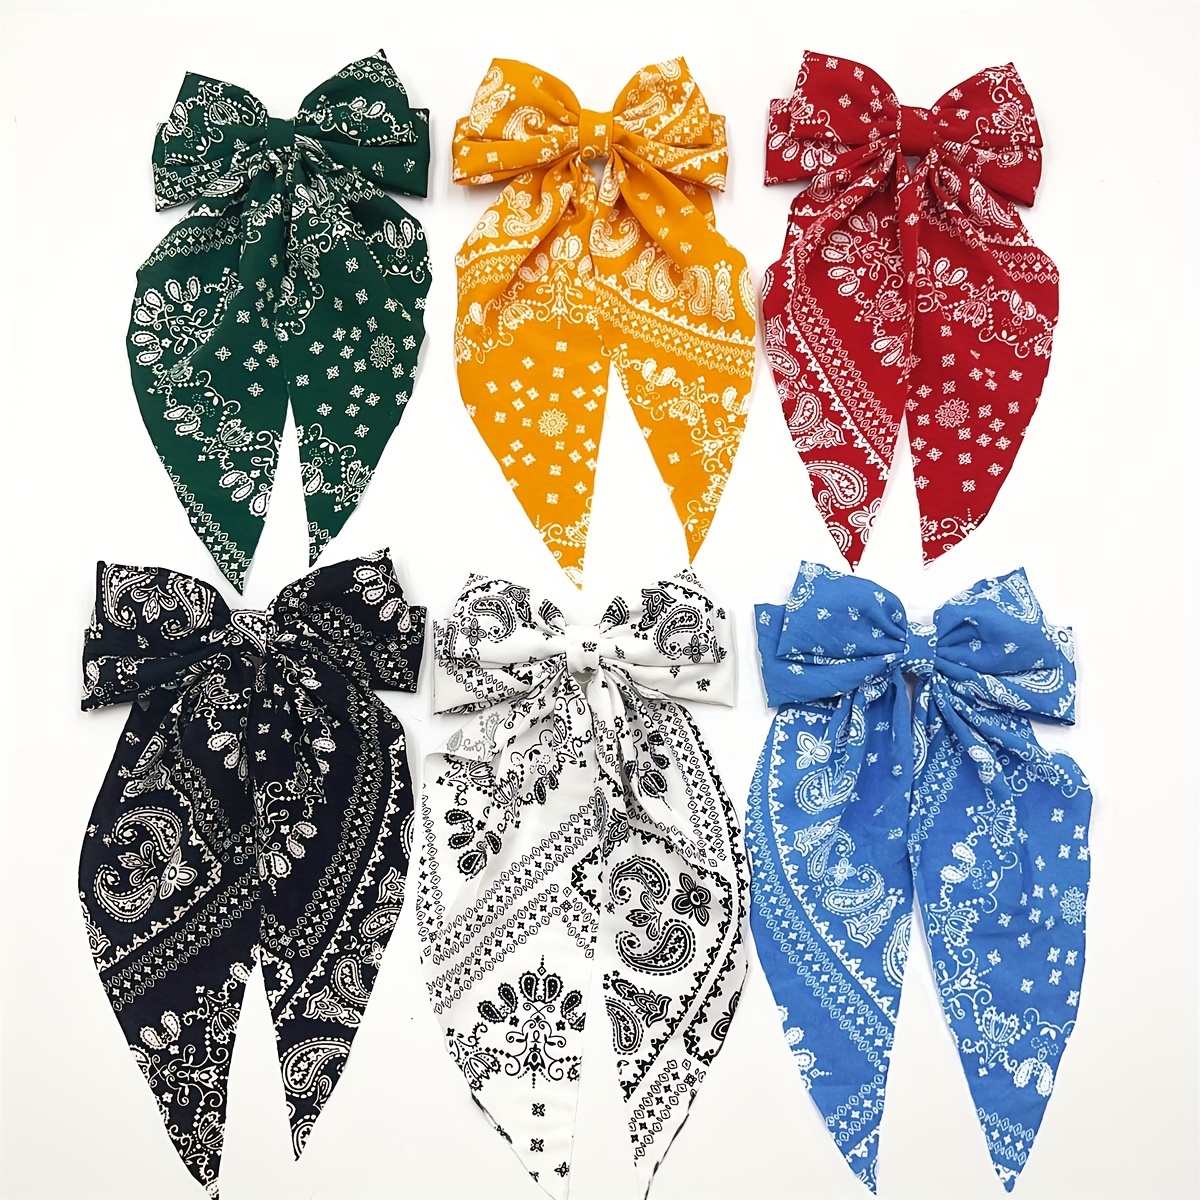 

6-piece Elegant Boho Paisley Bow Hair Clip Set - Chic Fabric Streamer Barrettes For Women & Girls, Perfect For Styling Updos & Vacation Looks